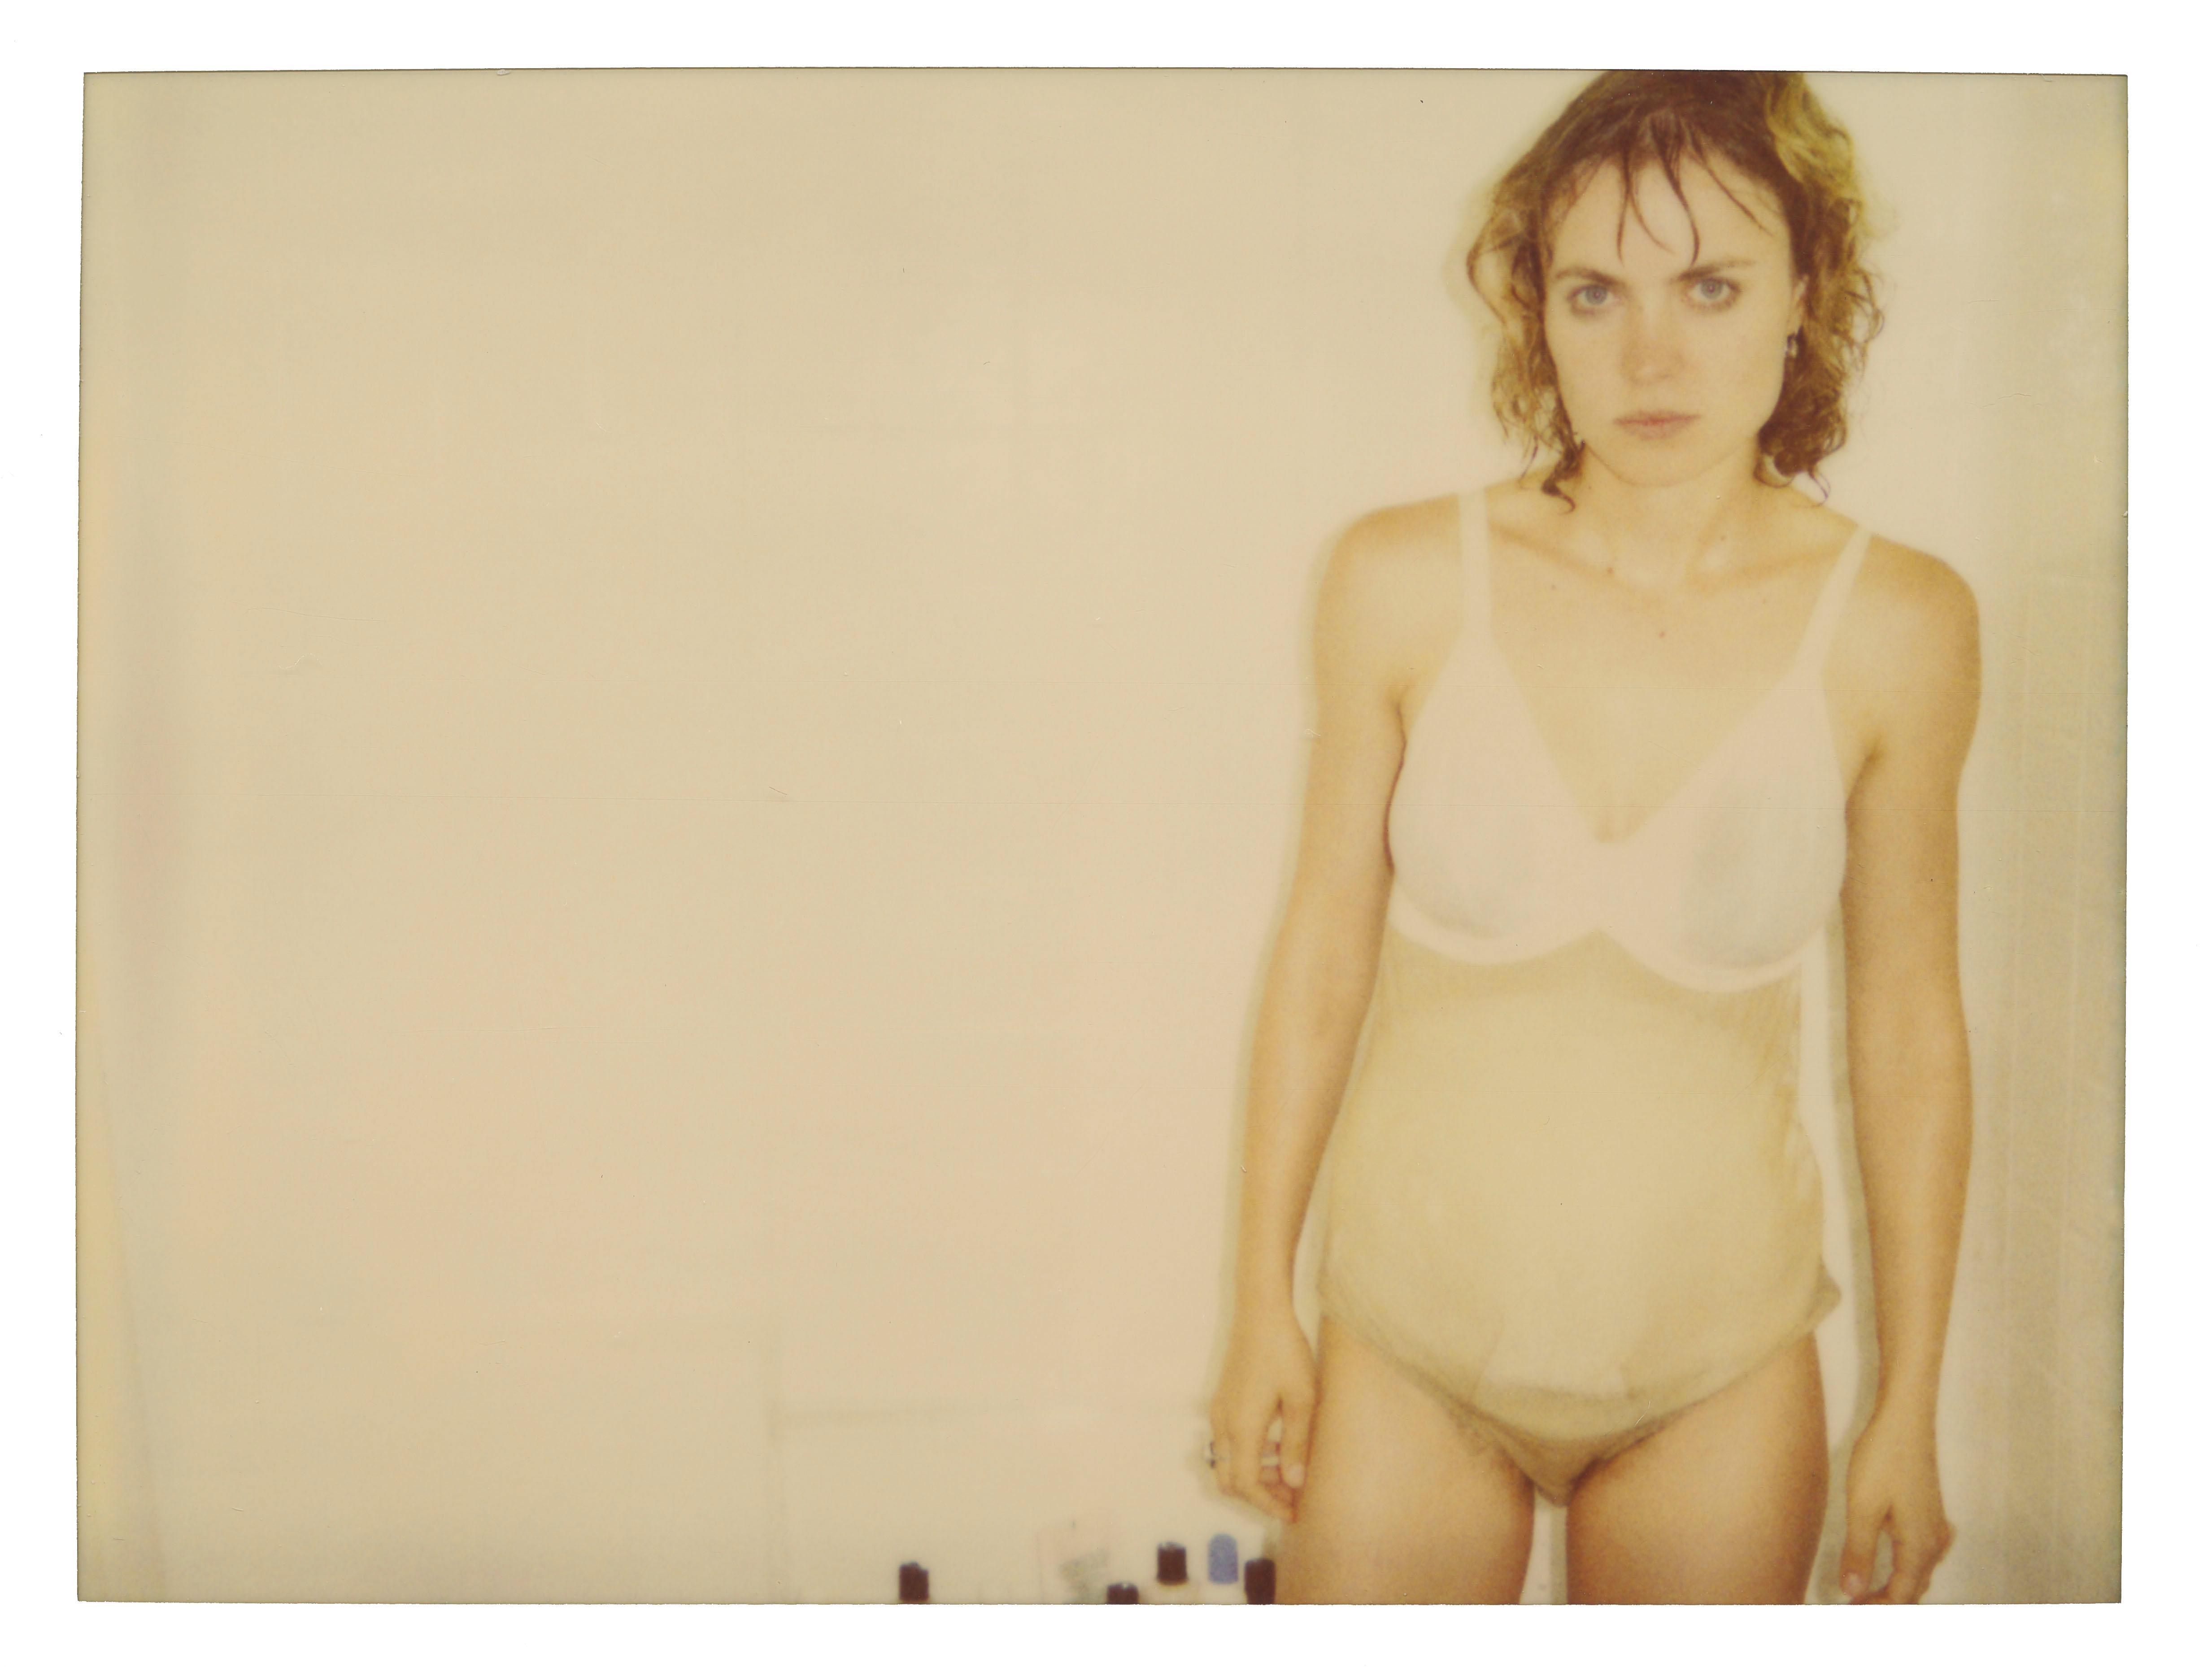 Stefanie Schneider Color Photograph - You see Me - Radha Mitchell, Contemporary, Polaroid, Analog, Color, Photography